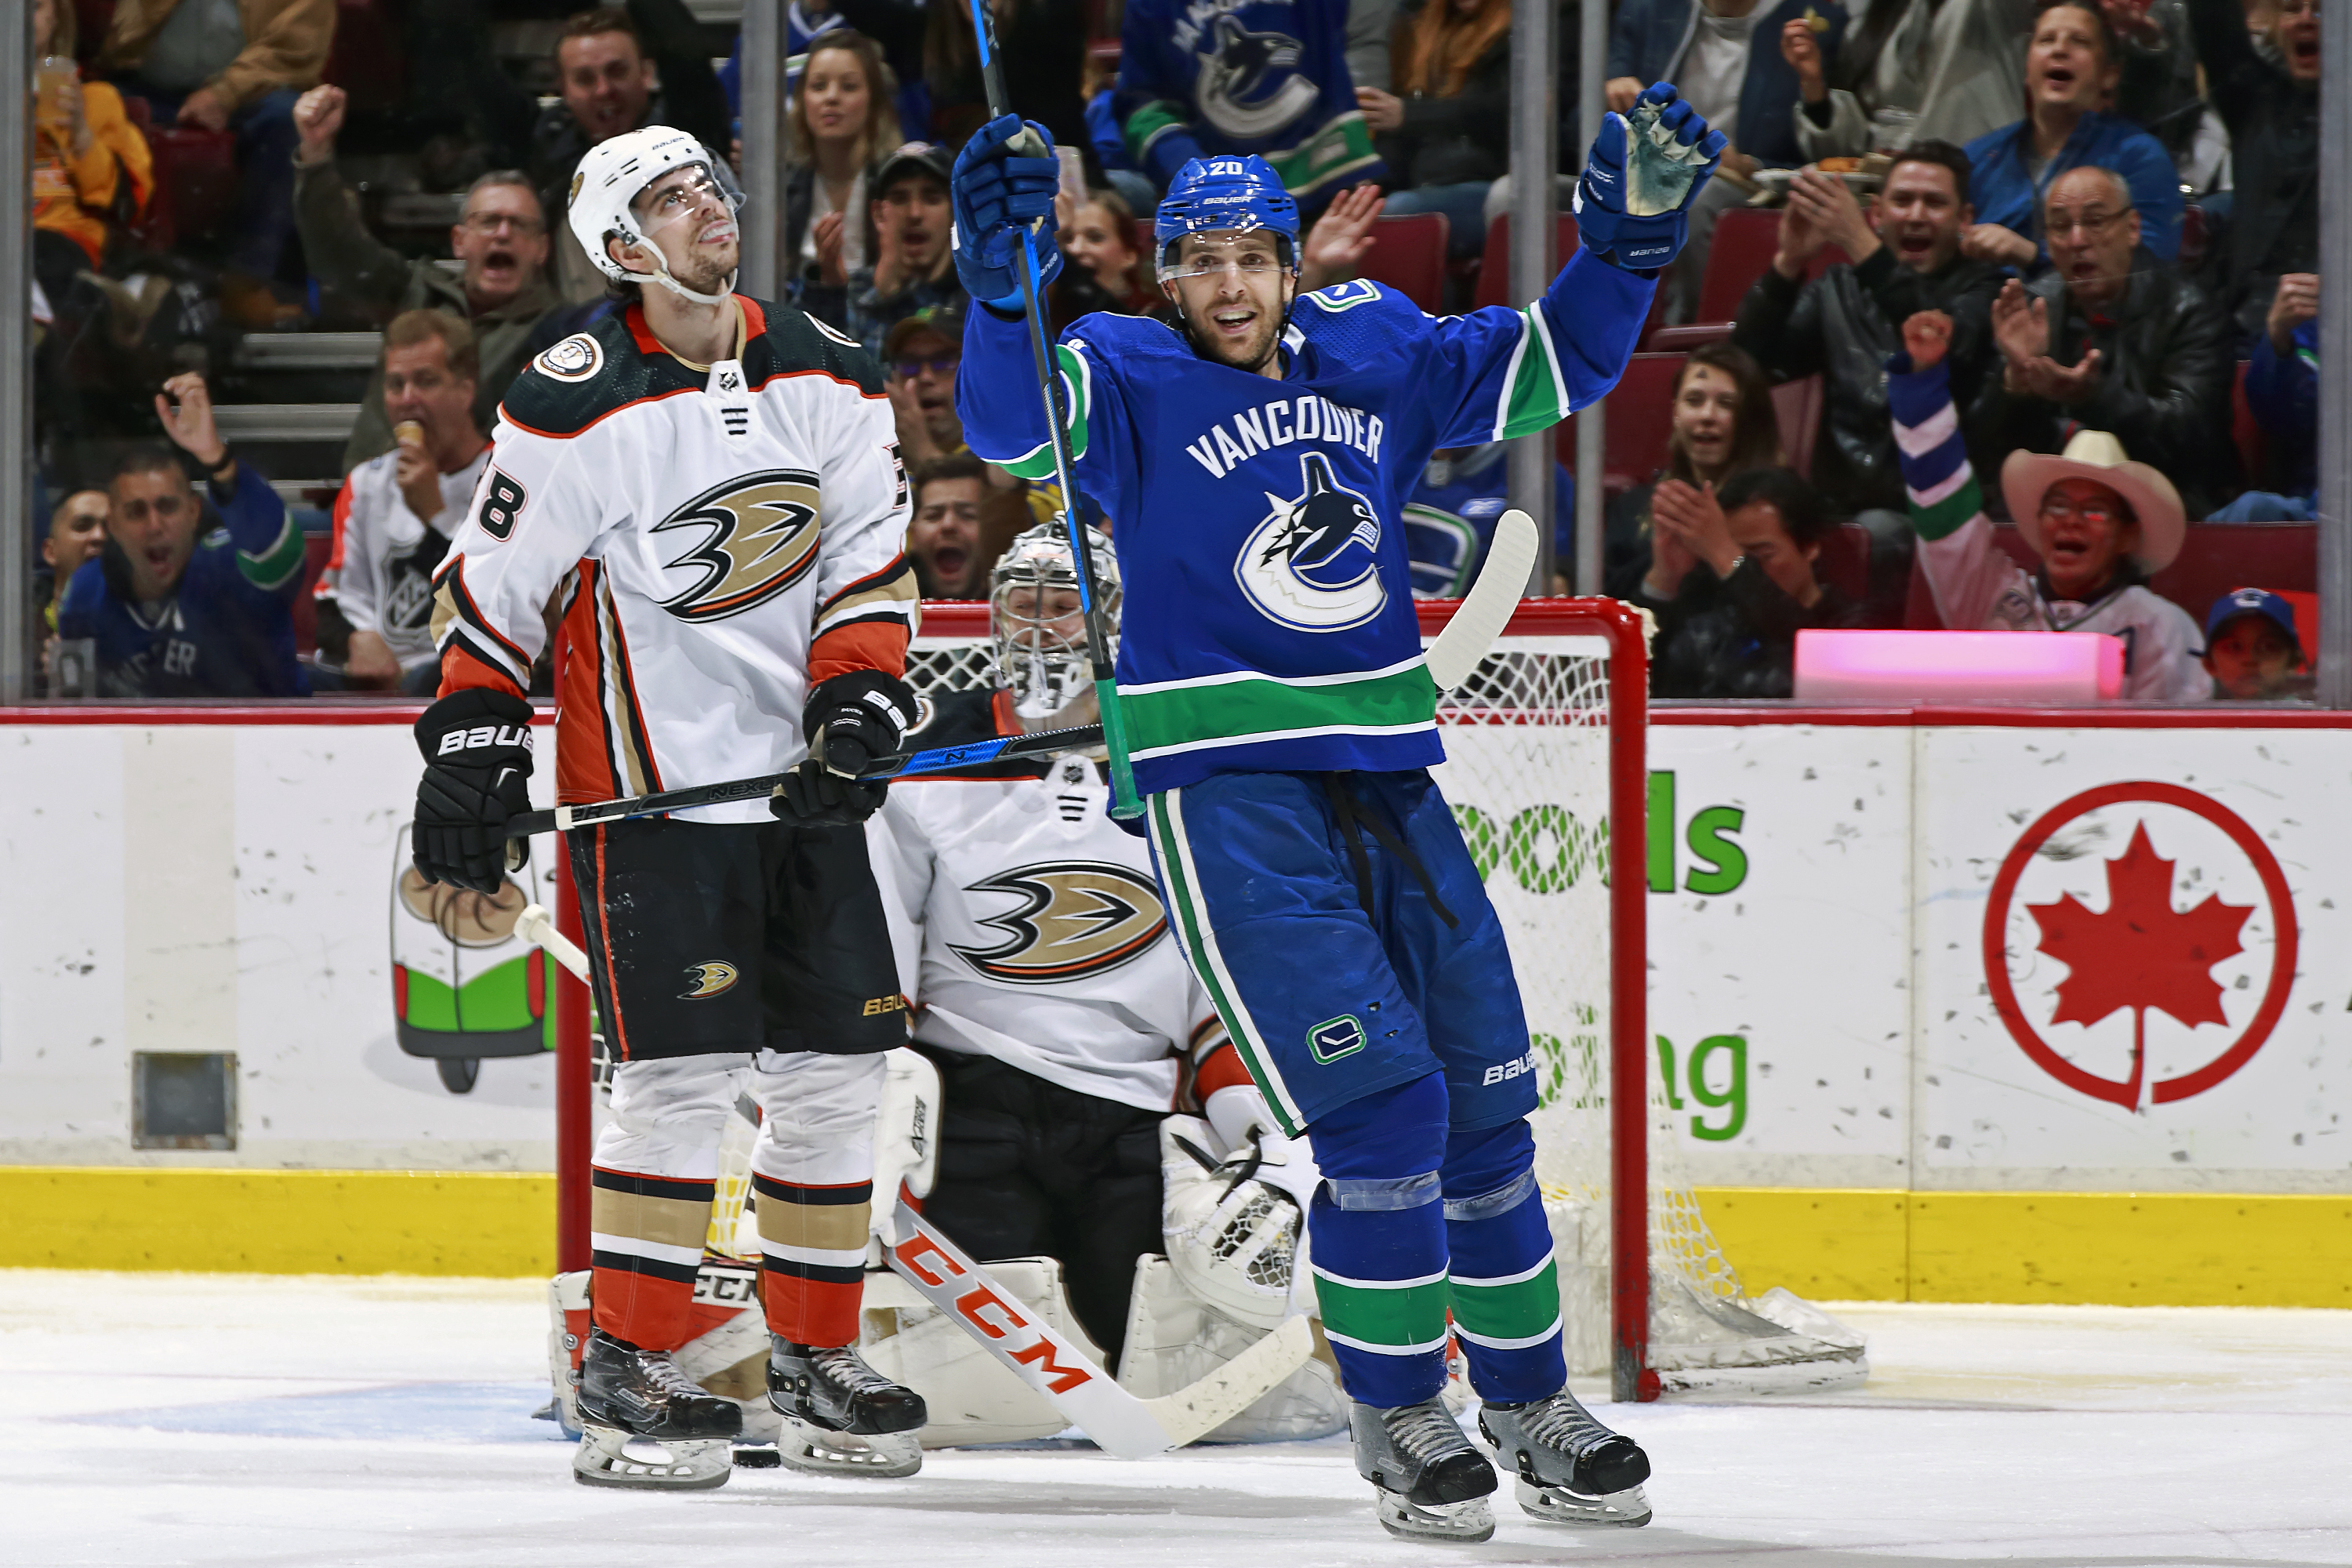 Canucks Game Day: Looking for some Juice against Anaheim Ducks